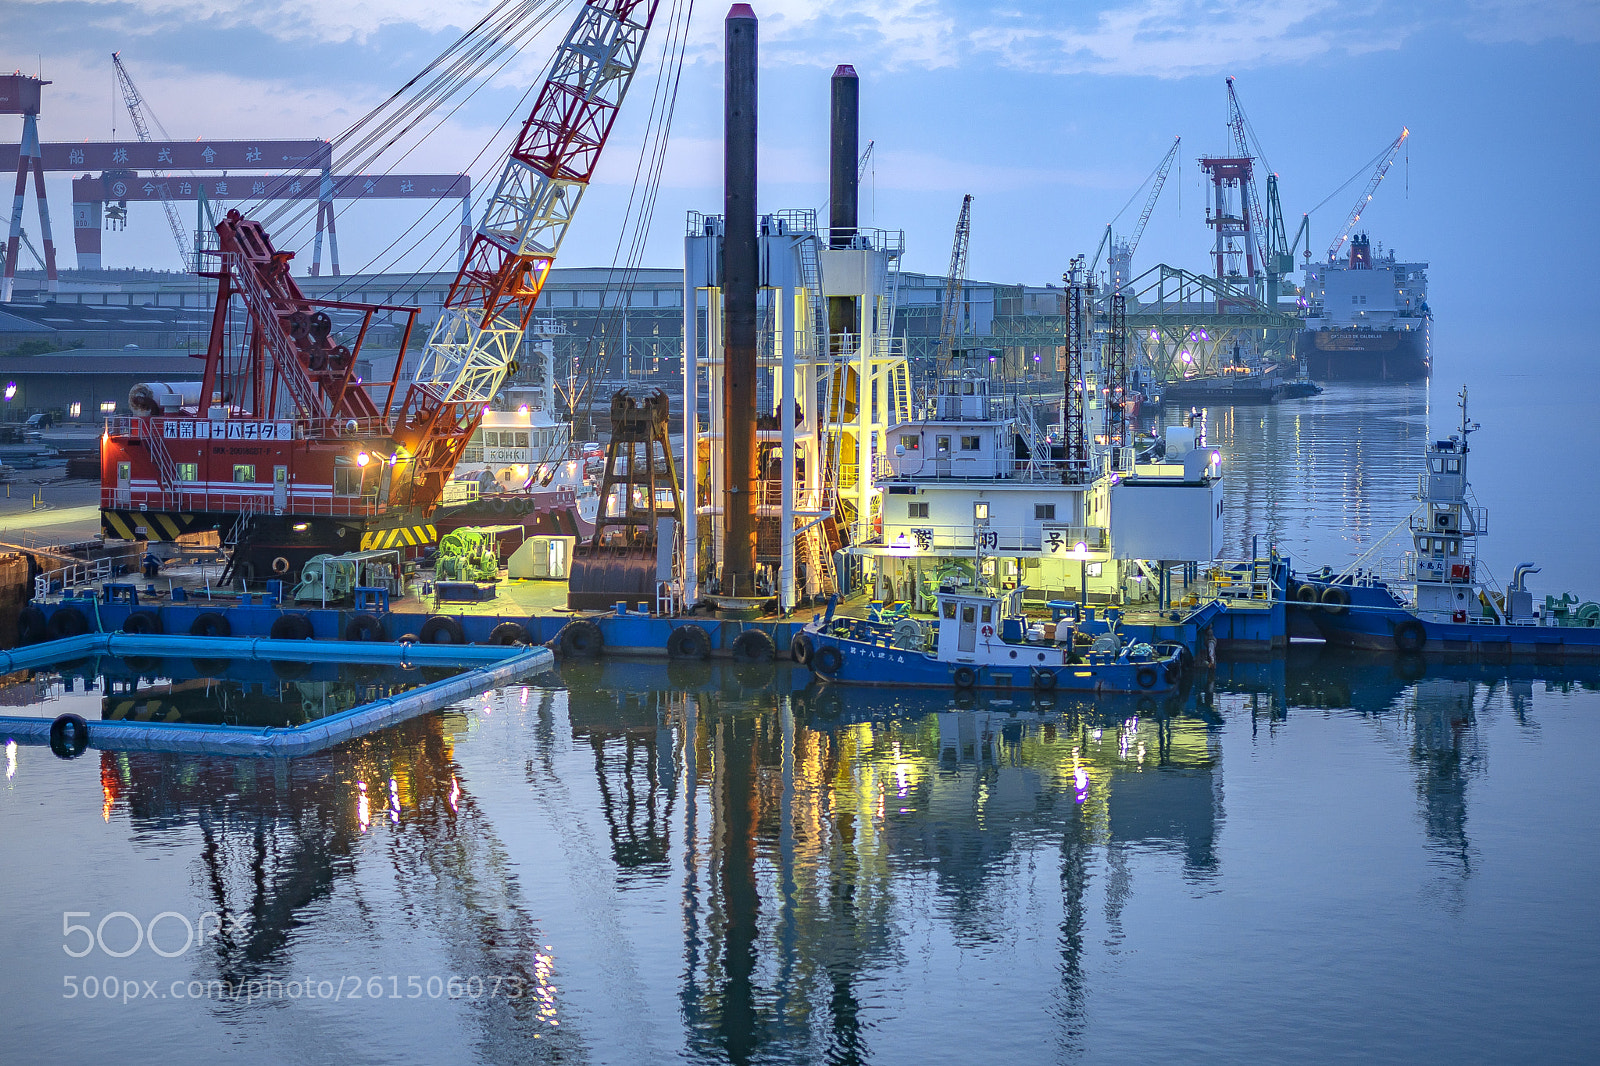 Sony a7 II sample photo. Shipbuilding factory floating in photography